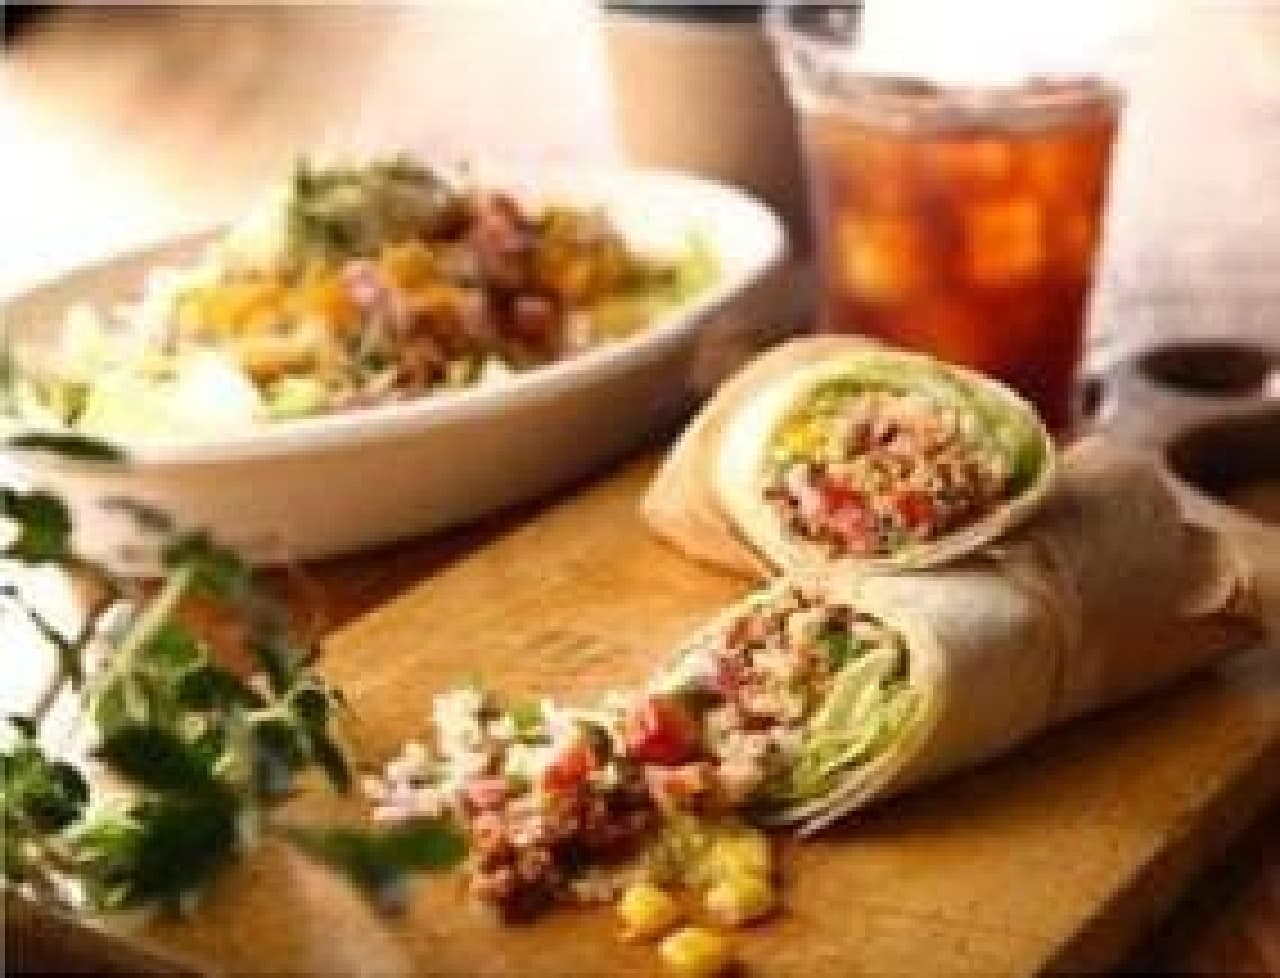 "Burrito" specialty store for "working women" opens